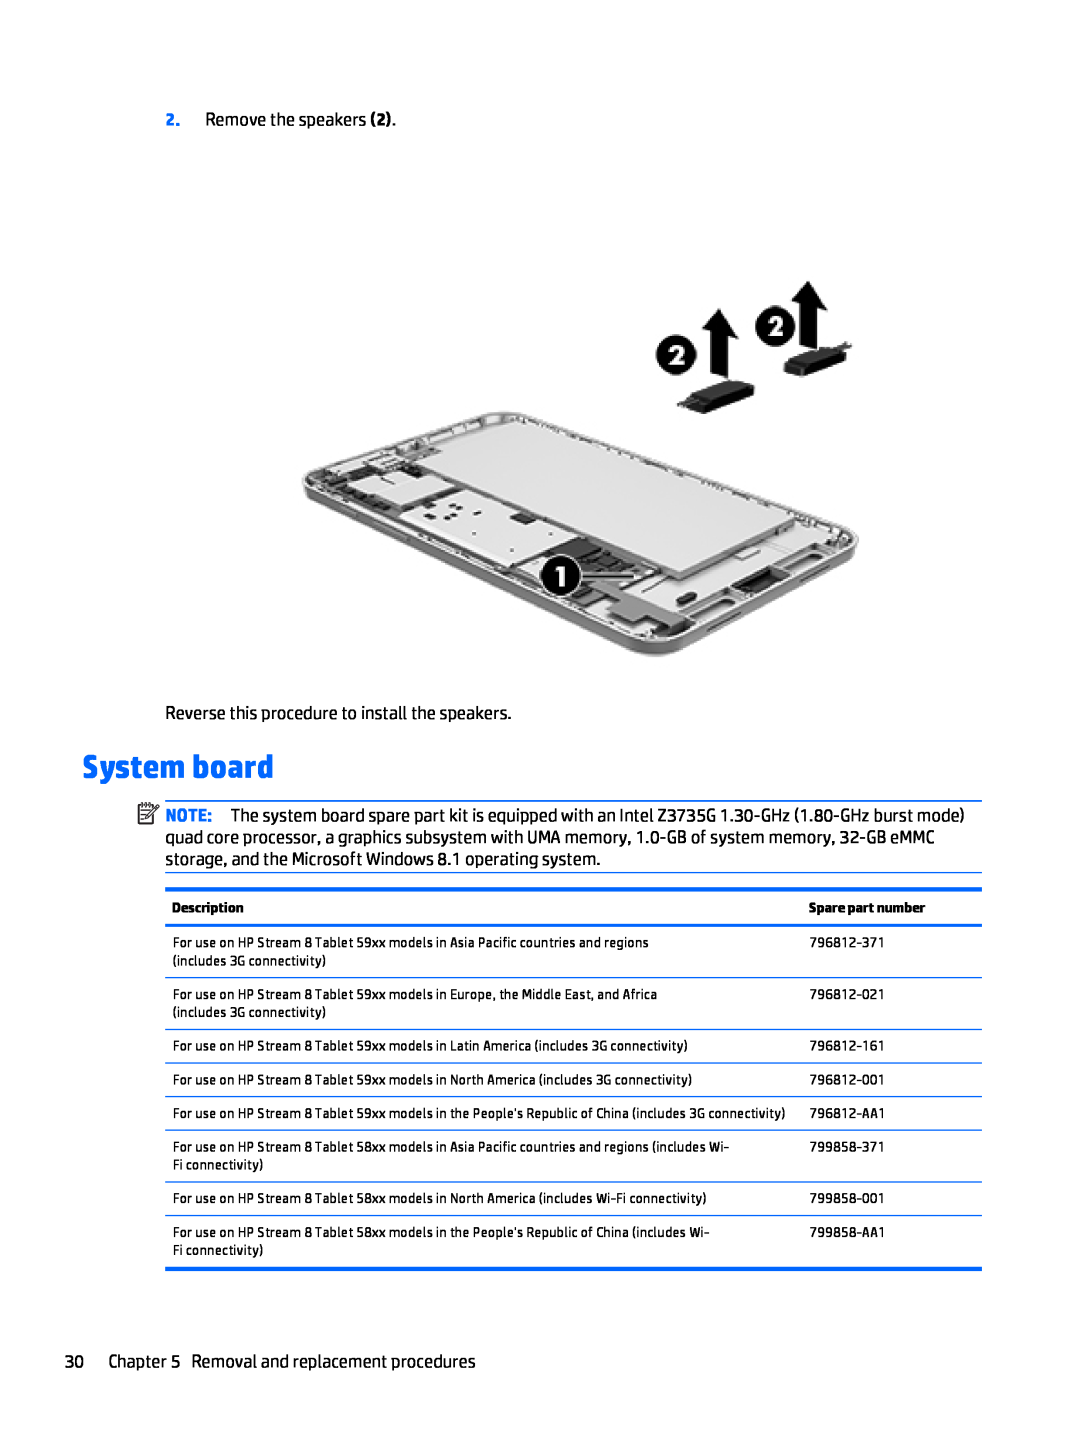 HP Stream 8 - 5909 manual System board, Remove the speakers Reverse this procedure to install the speakers, Description 